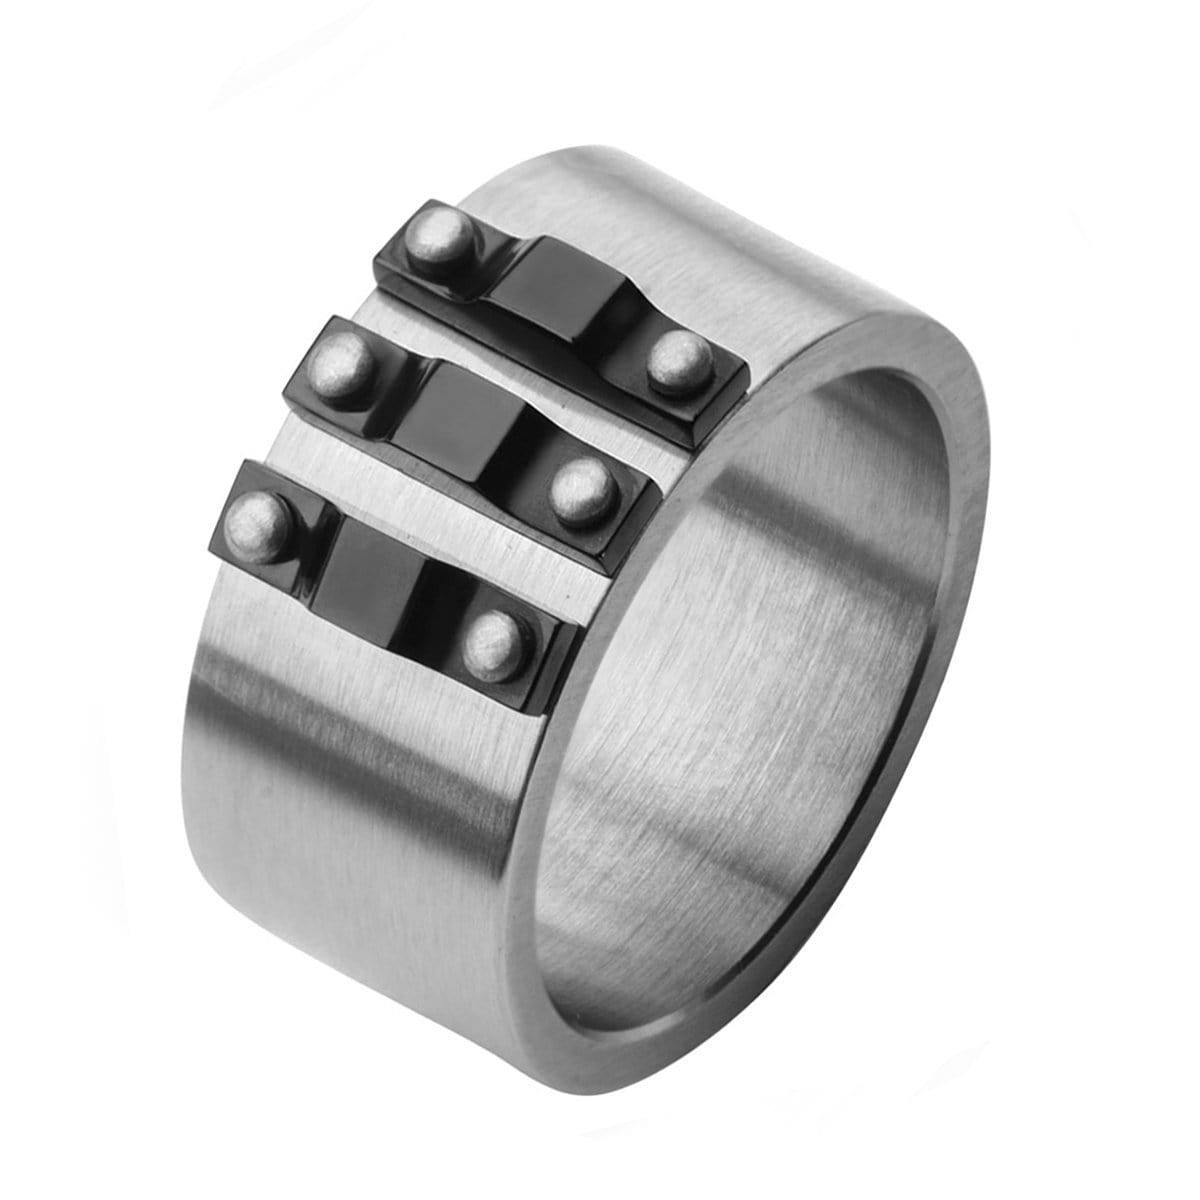 INOX JEWELRY Rings Black and Silver Tone Stainless Steel Bolted Ridge Band